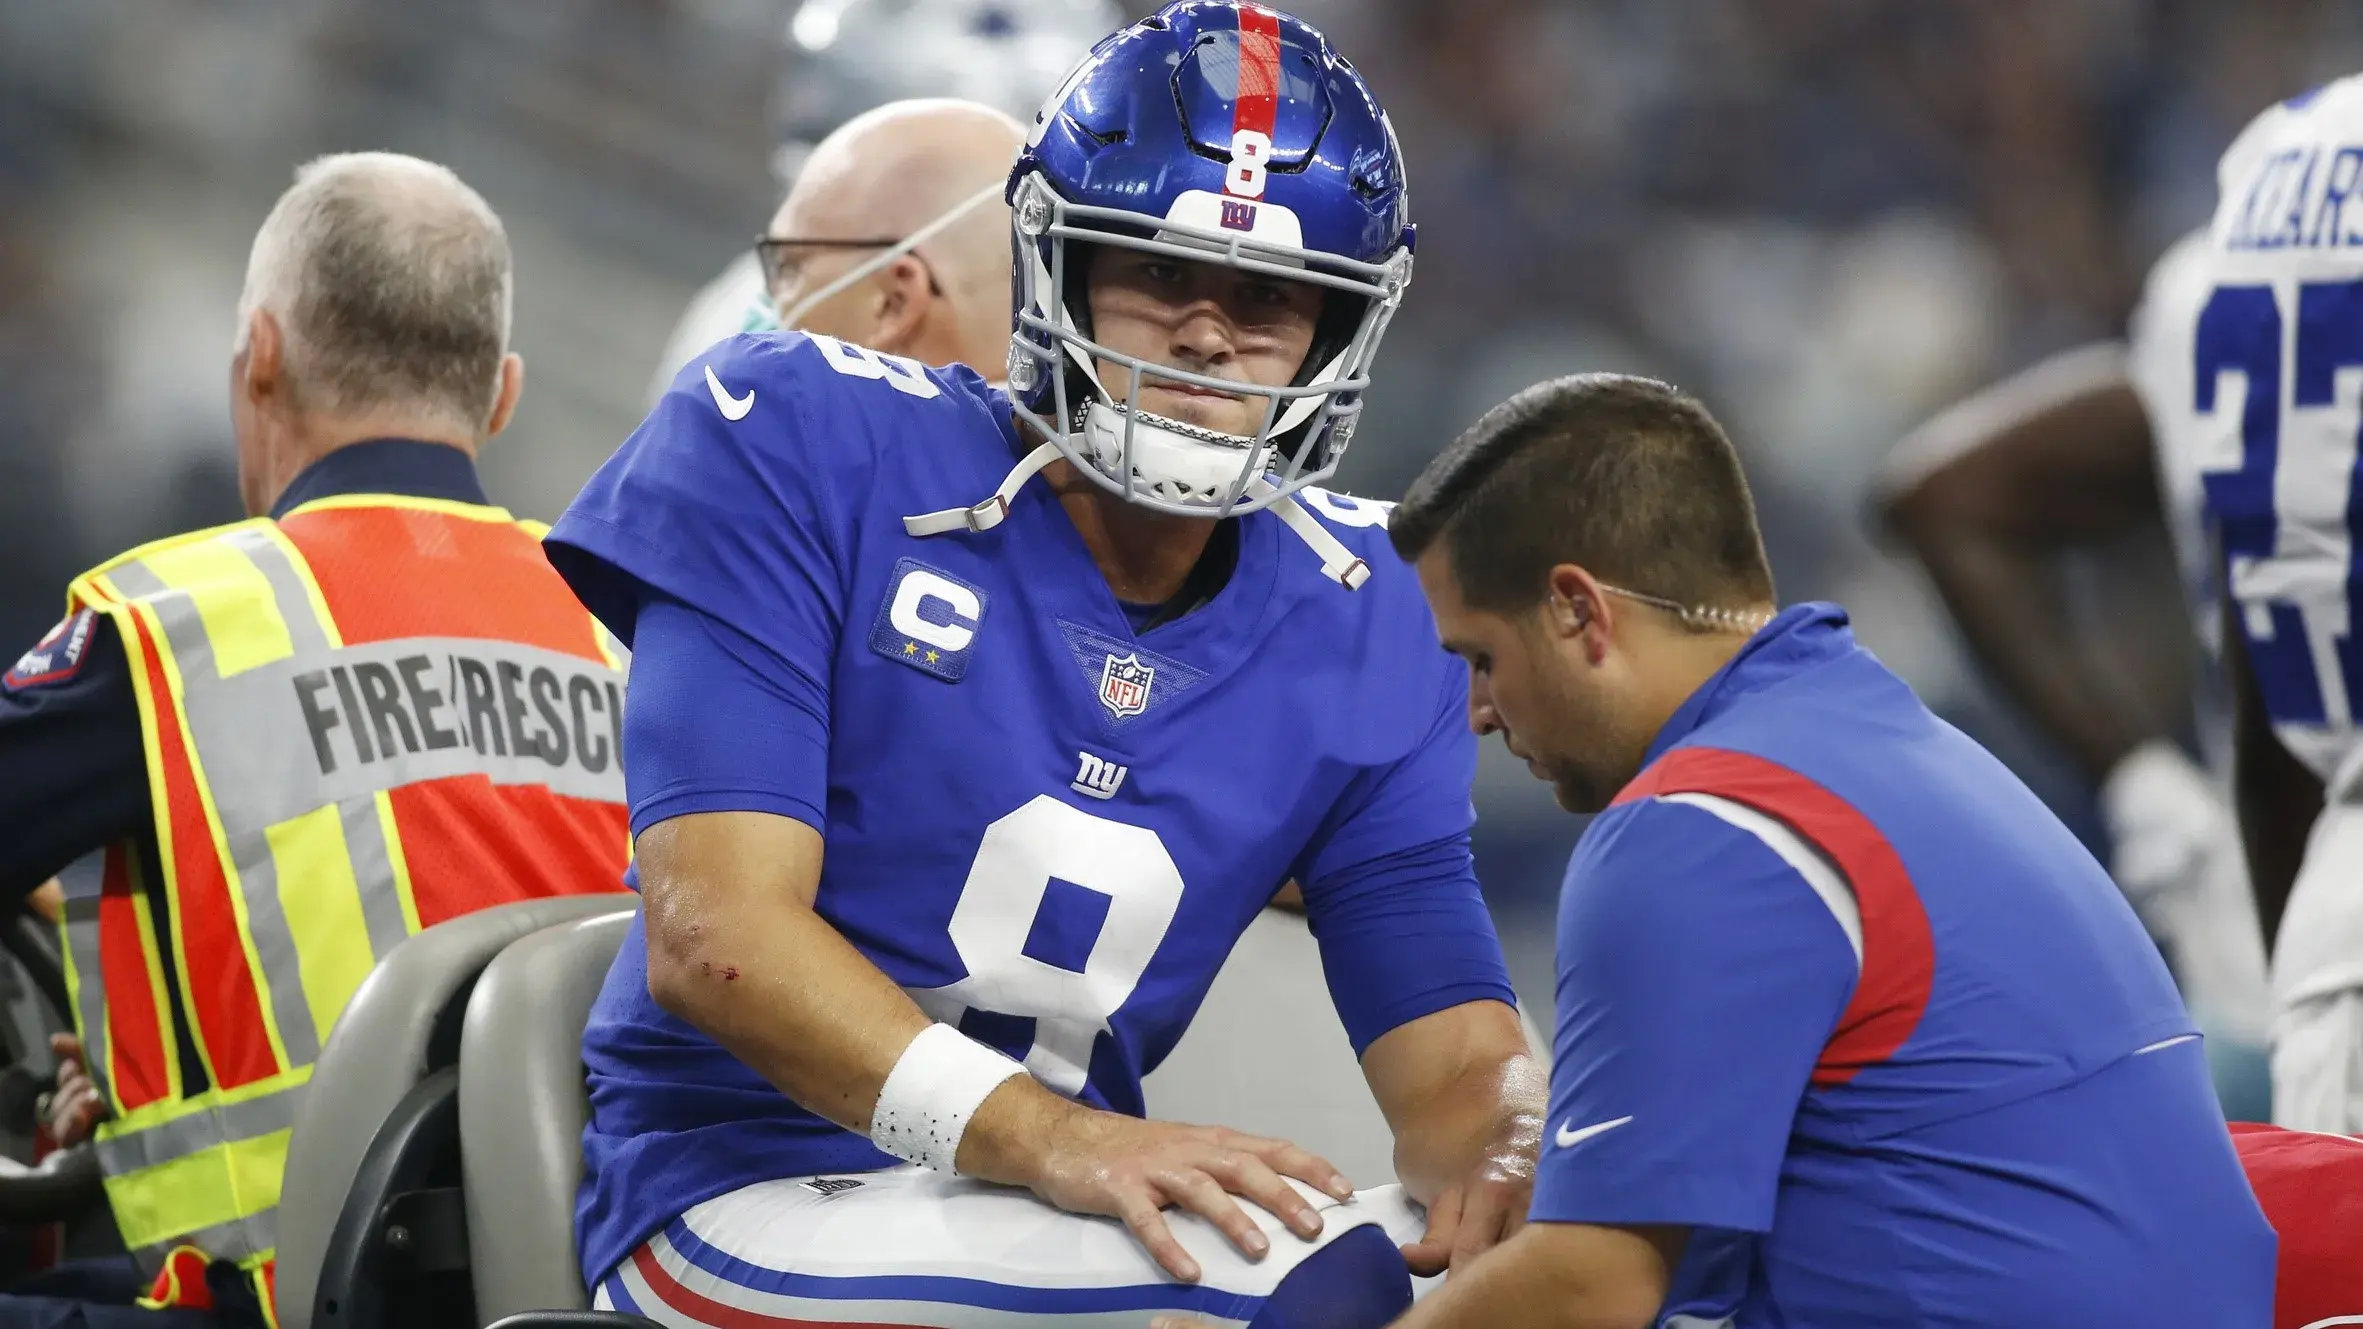 Oct 10, 2021; Arlington, Texas, USA; New York Giants quarterback Daniel Jones (8) leaves the field on a cart with an injury in the second quarter against the Dallas Cowboys at AT&T Stadium. / Tim Heitman-USA TODAY Sports